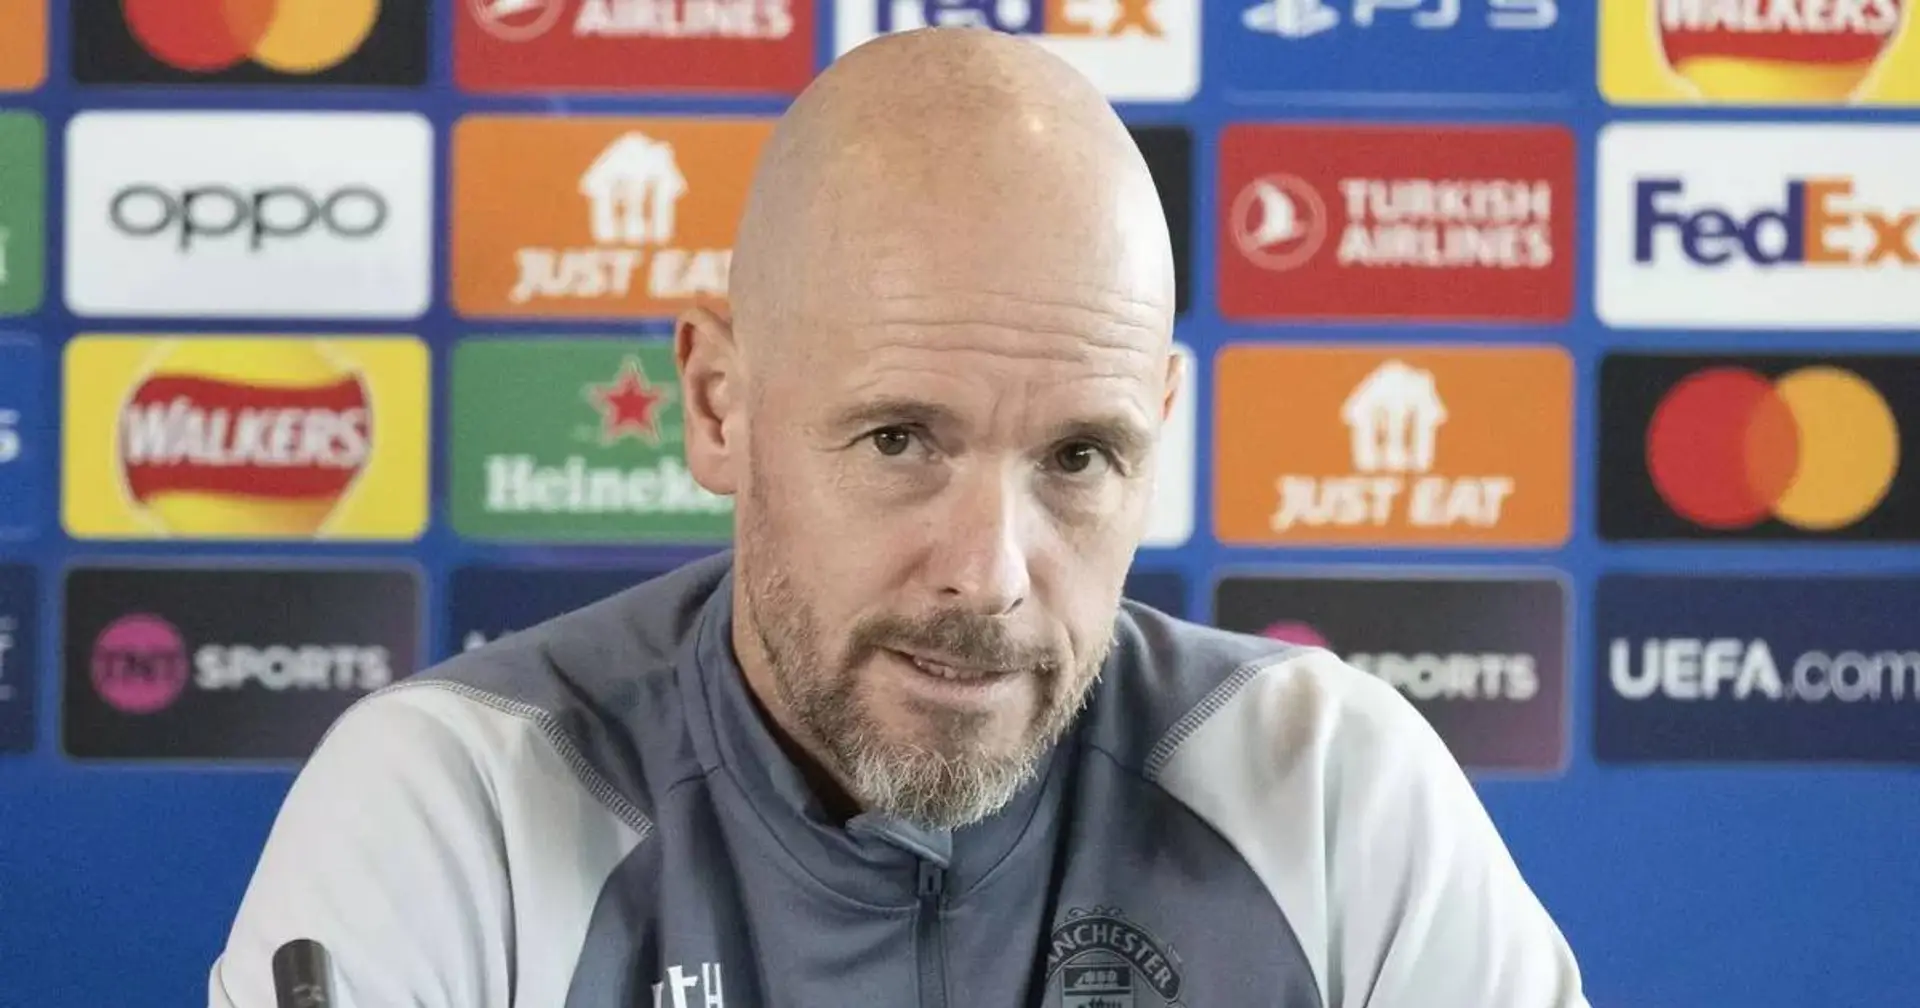 'You have to win every game': Ten Hag warns Man United squad ahead of facing Galatasaray